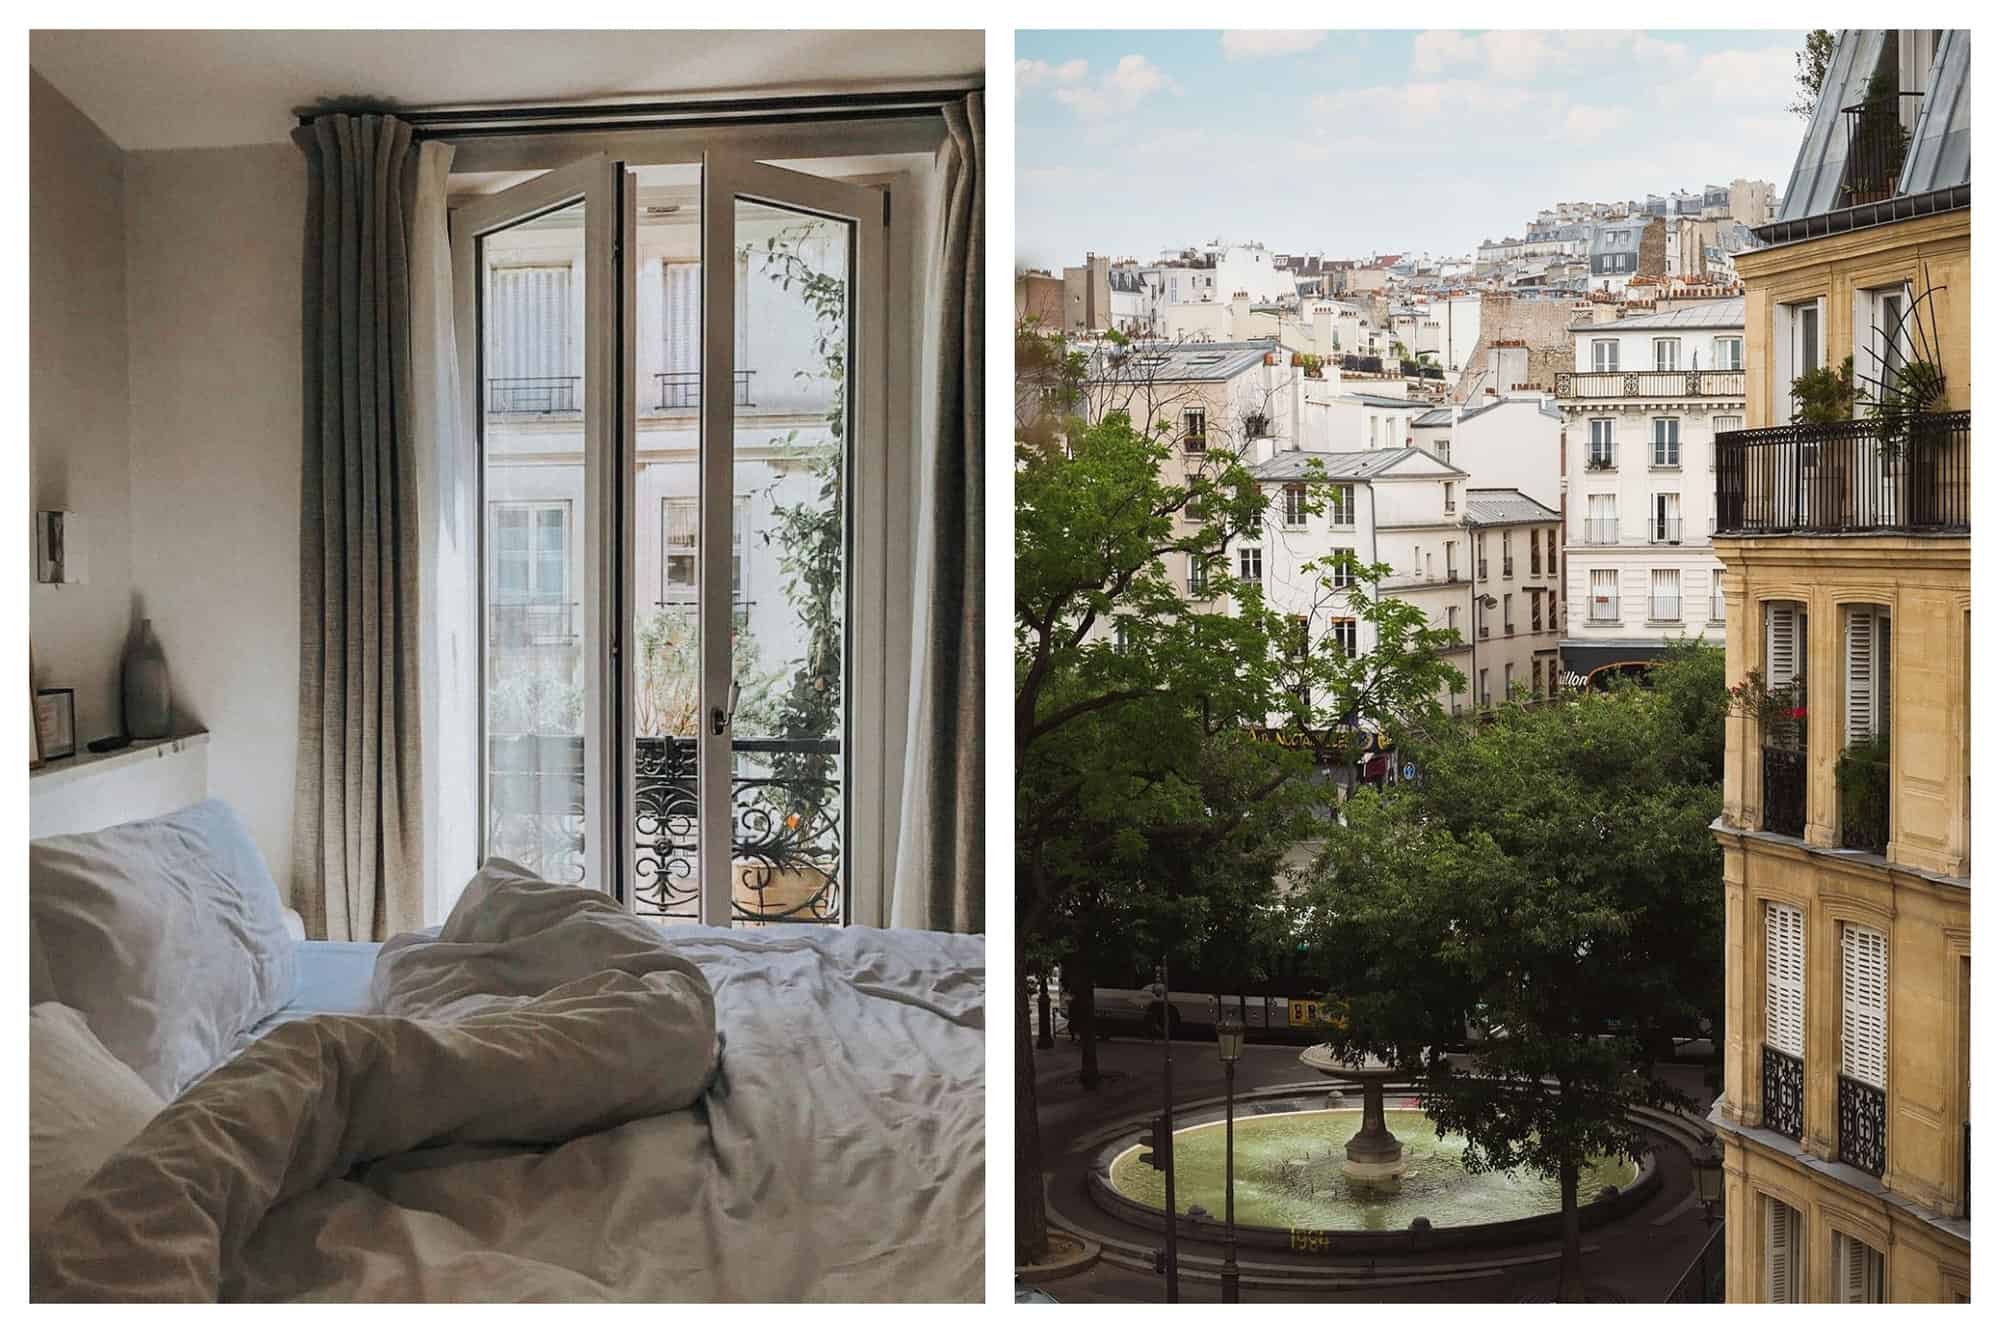 Left- At Le Pigalle a bed dressed in white linen is in front of a large open window.  Right- The fountain at Le Pigalle.